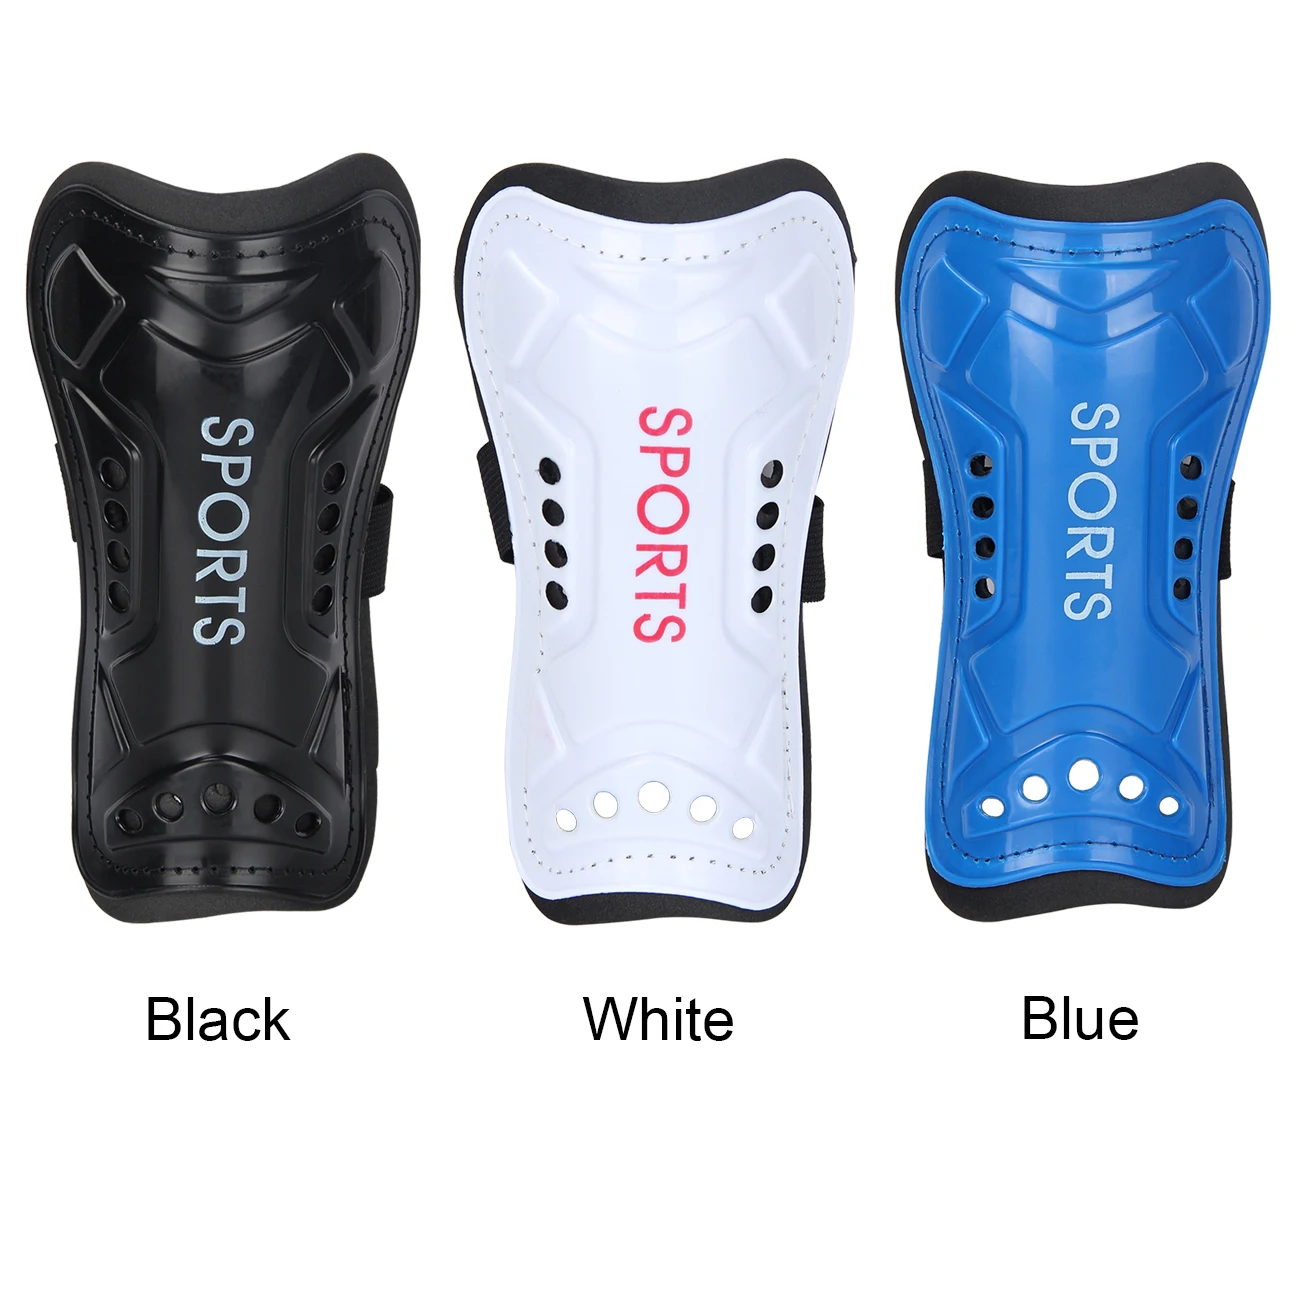 1 Pair Safety Protective Pads Knee Leg Protection Gear Shinguards Sleeves Sports protective gear soccer strap shin guards